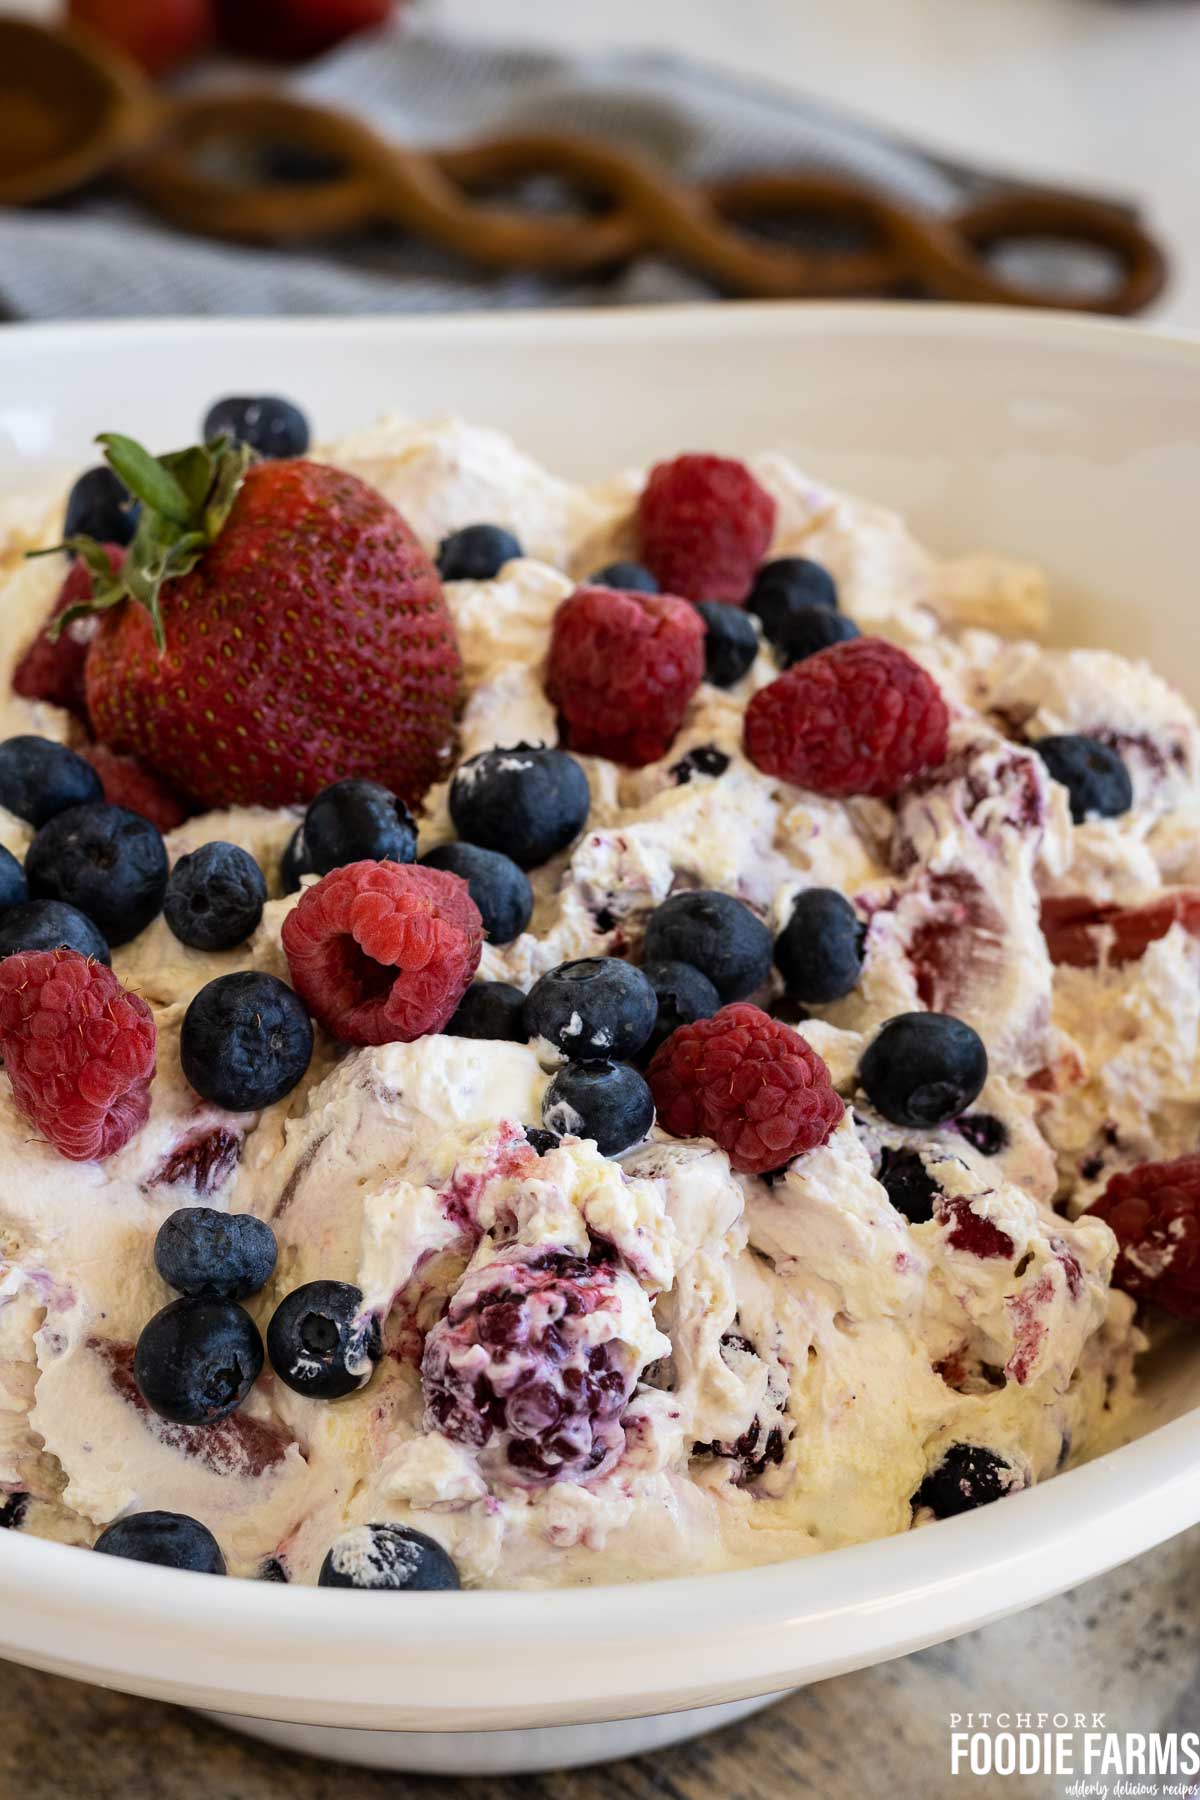 A creamy berry salad with fresh and frozen blueberries, raspberries, and strawberries.